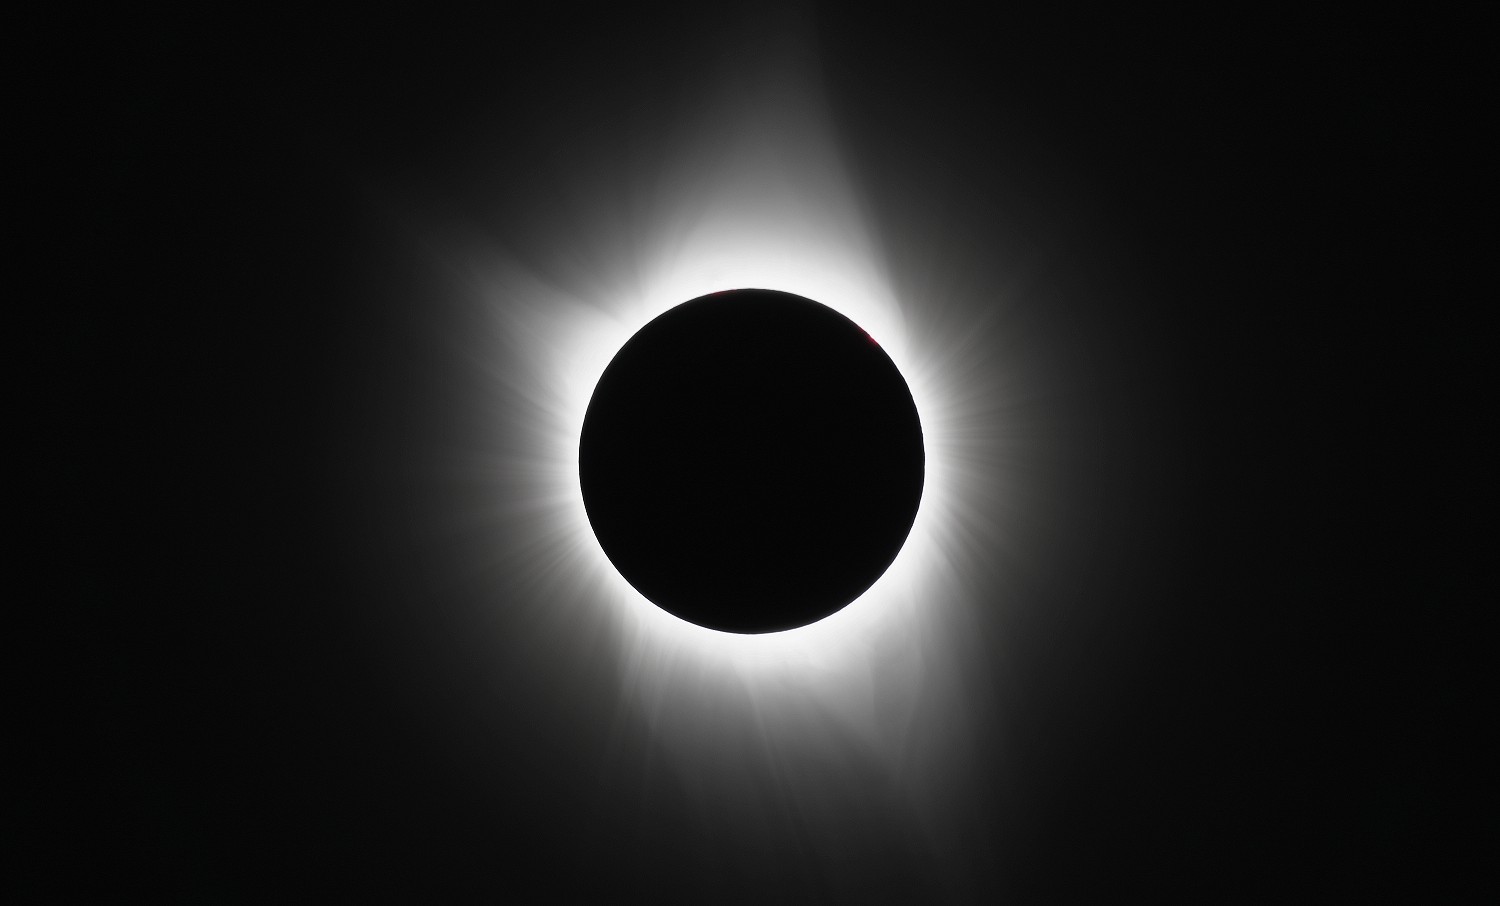 [Totality Through a Telescope, August 17, 2017]